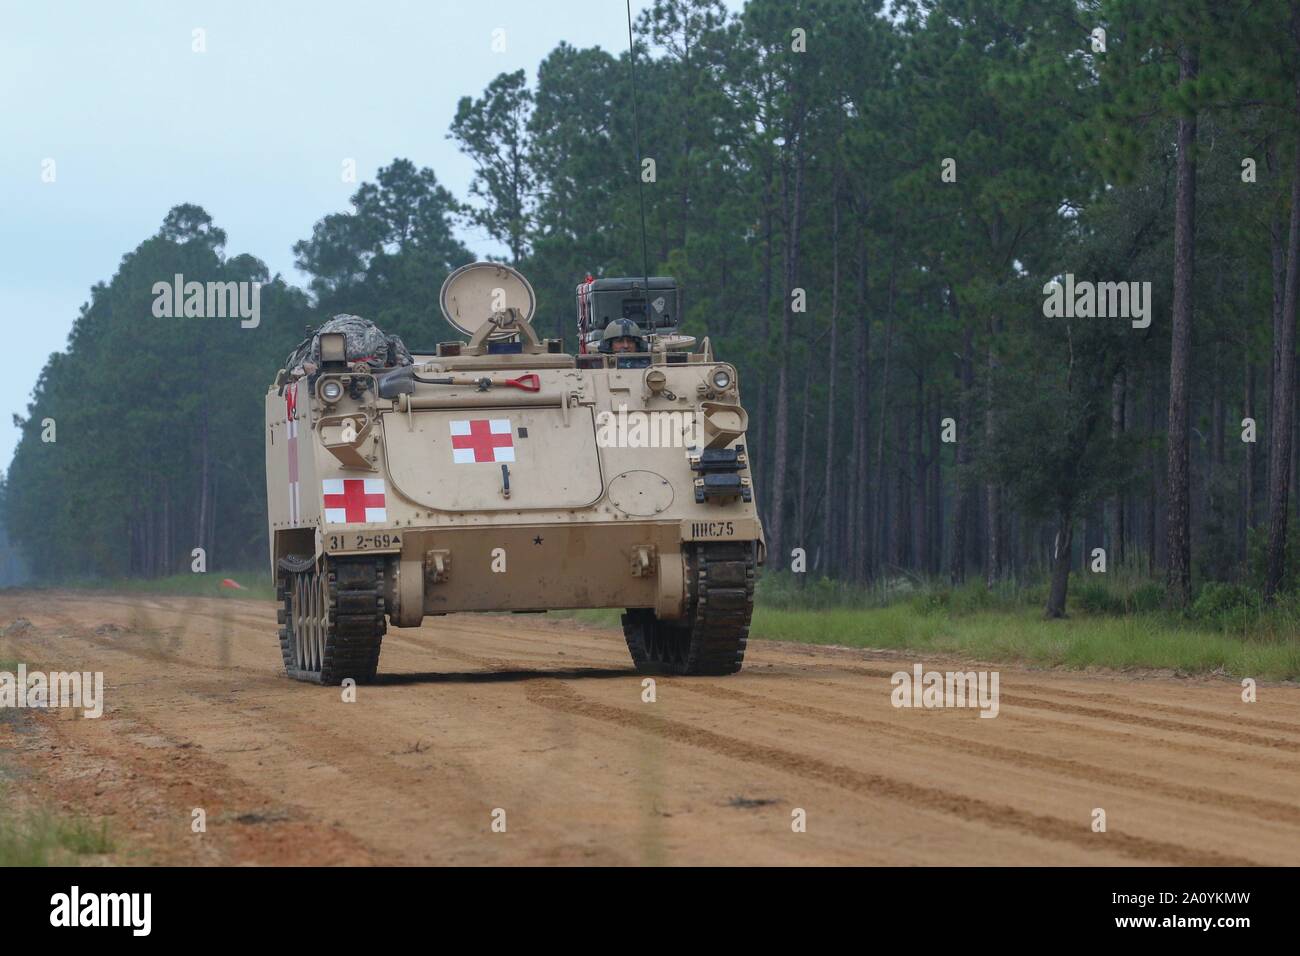 Combat medics from the 2nd Battalion, 69th Armored Regiment, 2nd Armored Brigade Combat Team, 3rd Infantry Division, maneuver an M113 Armored Personnel Carrier through a trauma lane training exercise at Fort Stewart, Ga., Sep. 18, 2019. The training exercise is designed to test Soldier skills and knowledge on 9-Line MEDEVAC radio operations, and battlefield trauma casualty care in preparation for Panther Focus. (U.S. Army photo by Sgt. Andres Chandler/released) #Readynow #Sendme #ROTM Stock Photo